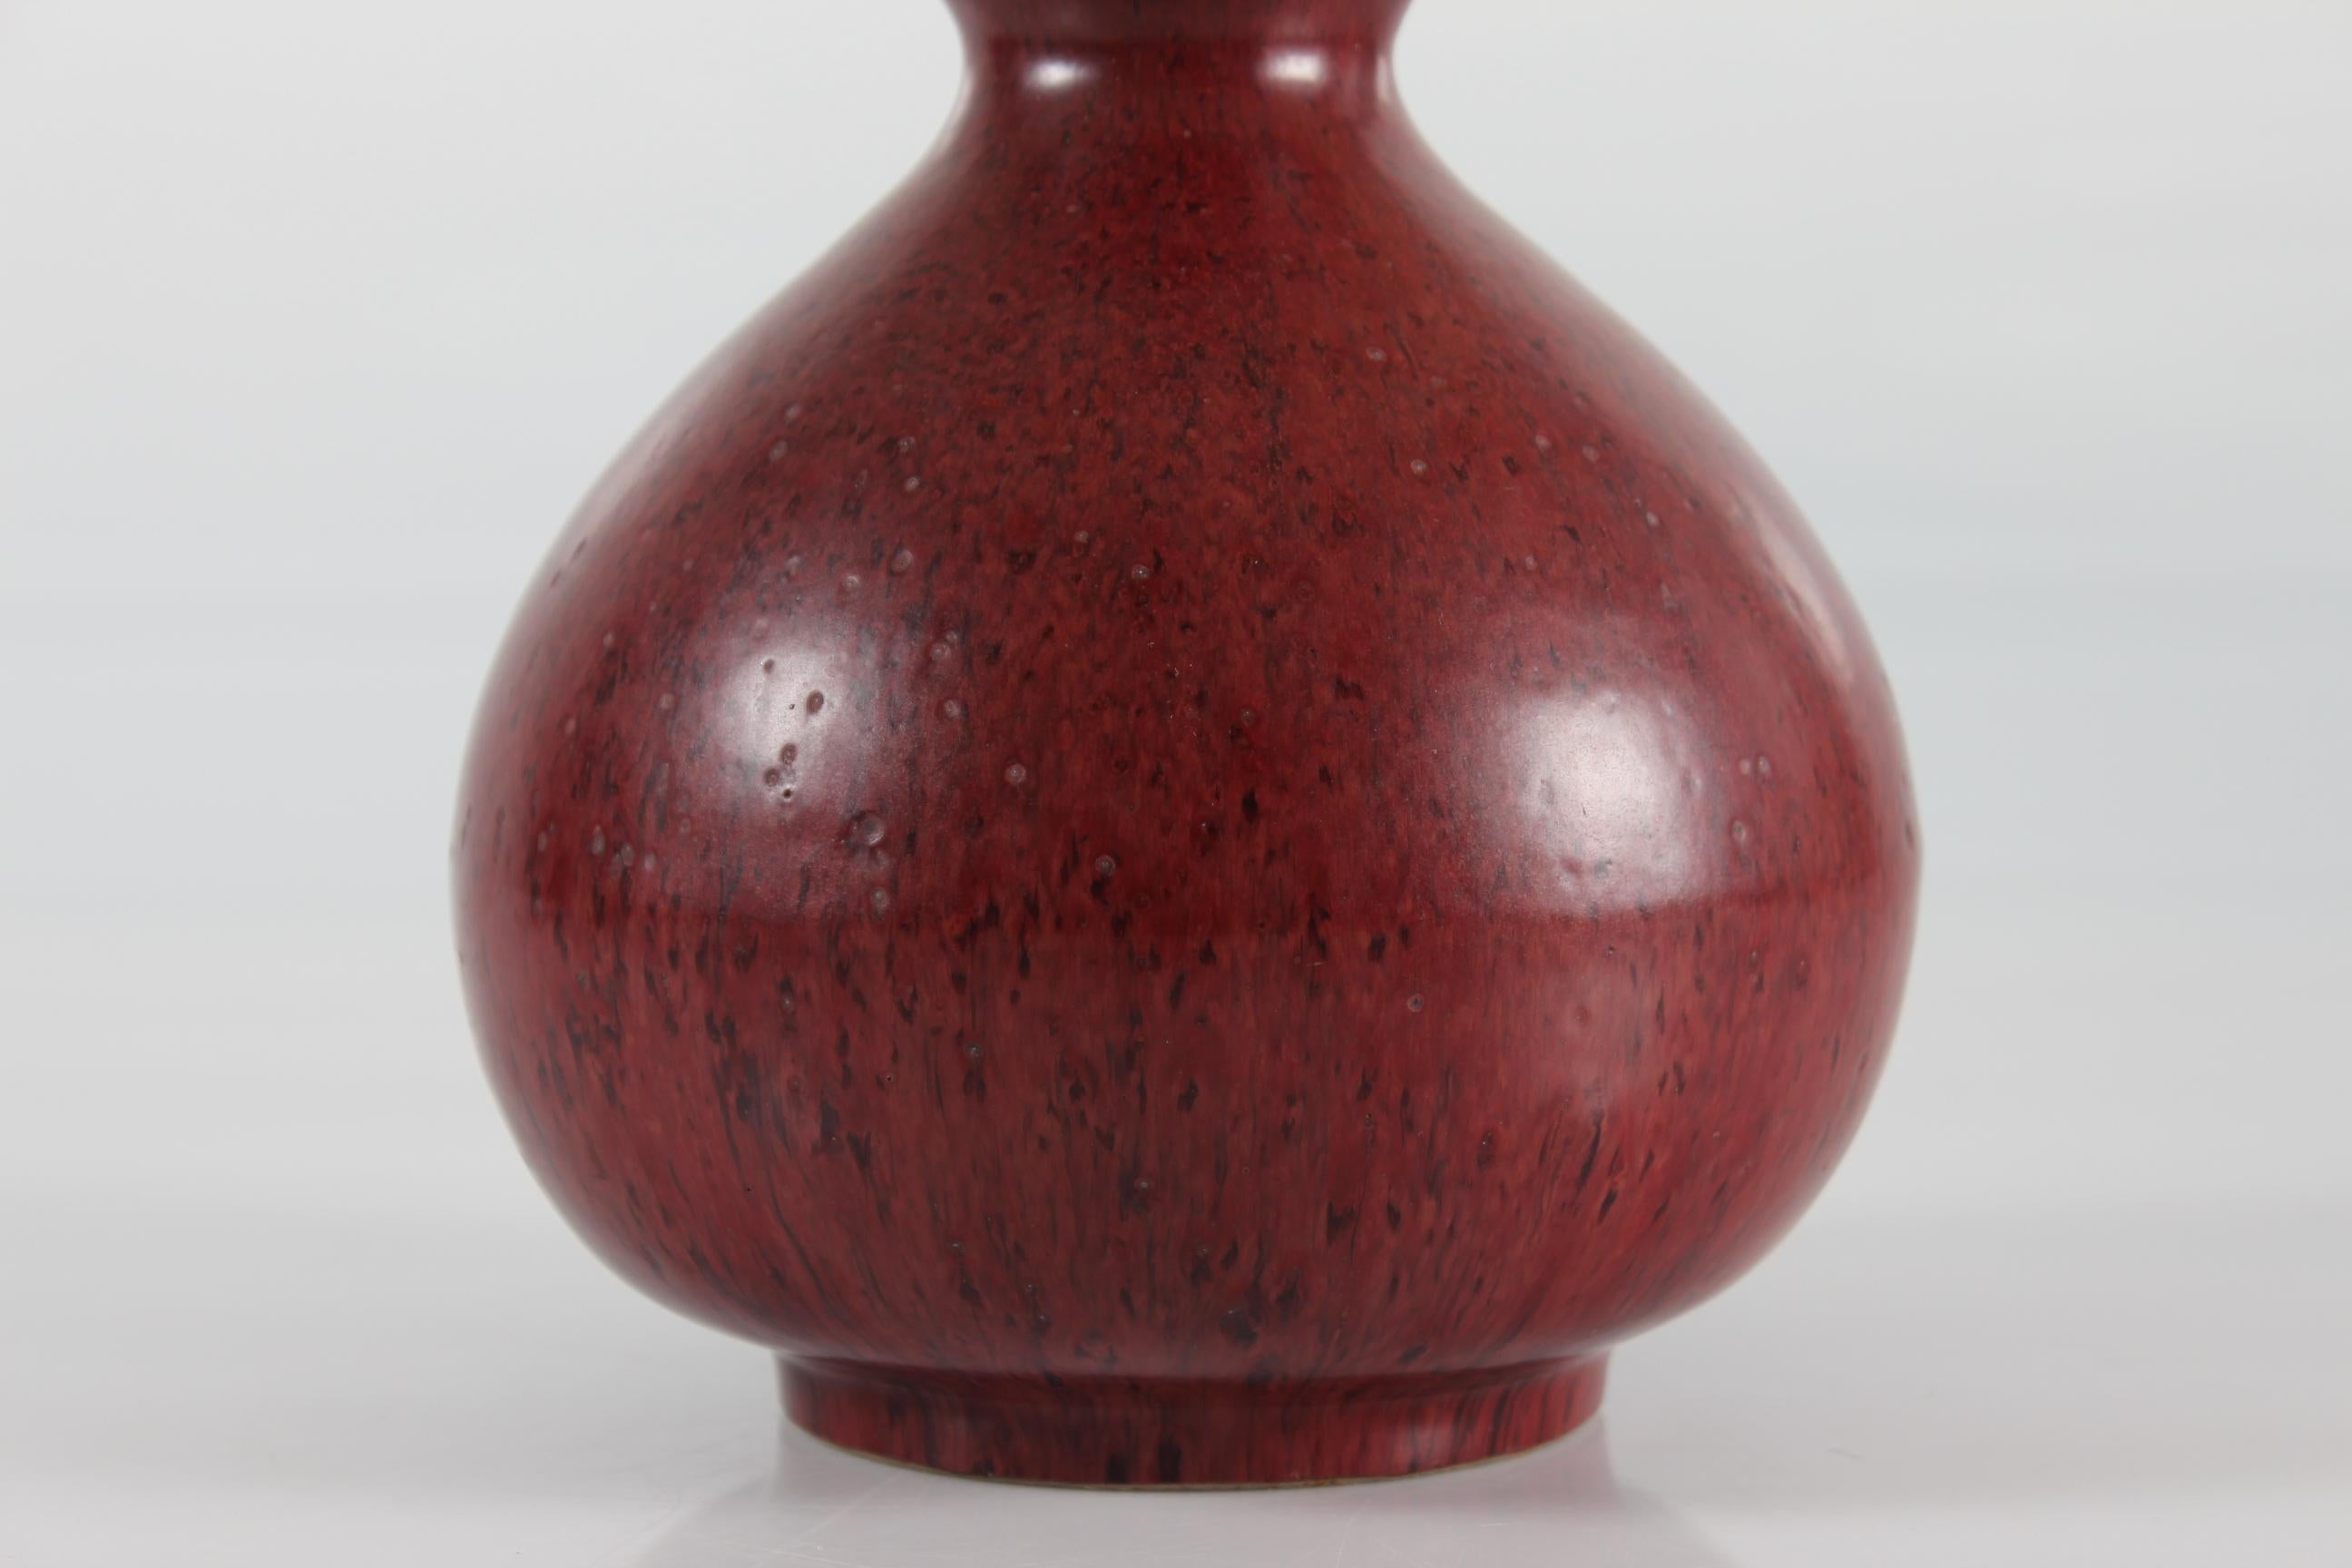 Rare stoneware table lamp no. 20658 designed by Axel Salto (1889-1961)
The gourd- or calabash sharped lamp foot is decorated with semi matte oxblood glaze.

Manufactured by Royal Copenhagen and sign. Salto, 20658 

Included is a new lampshade